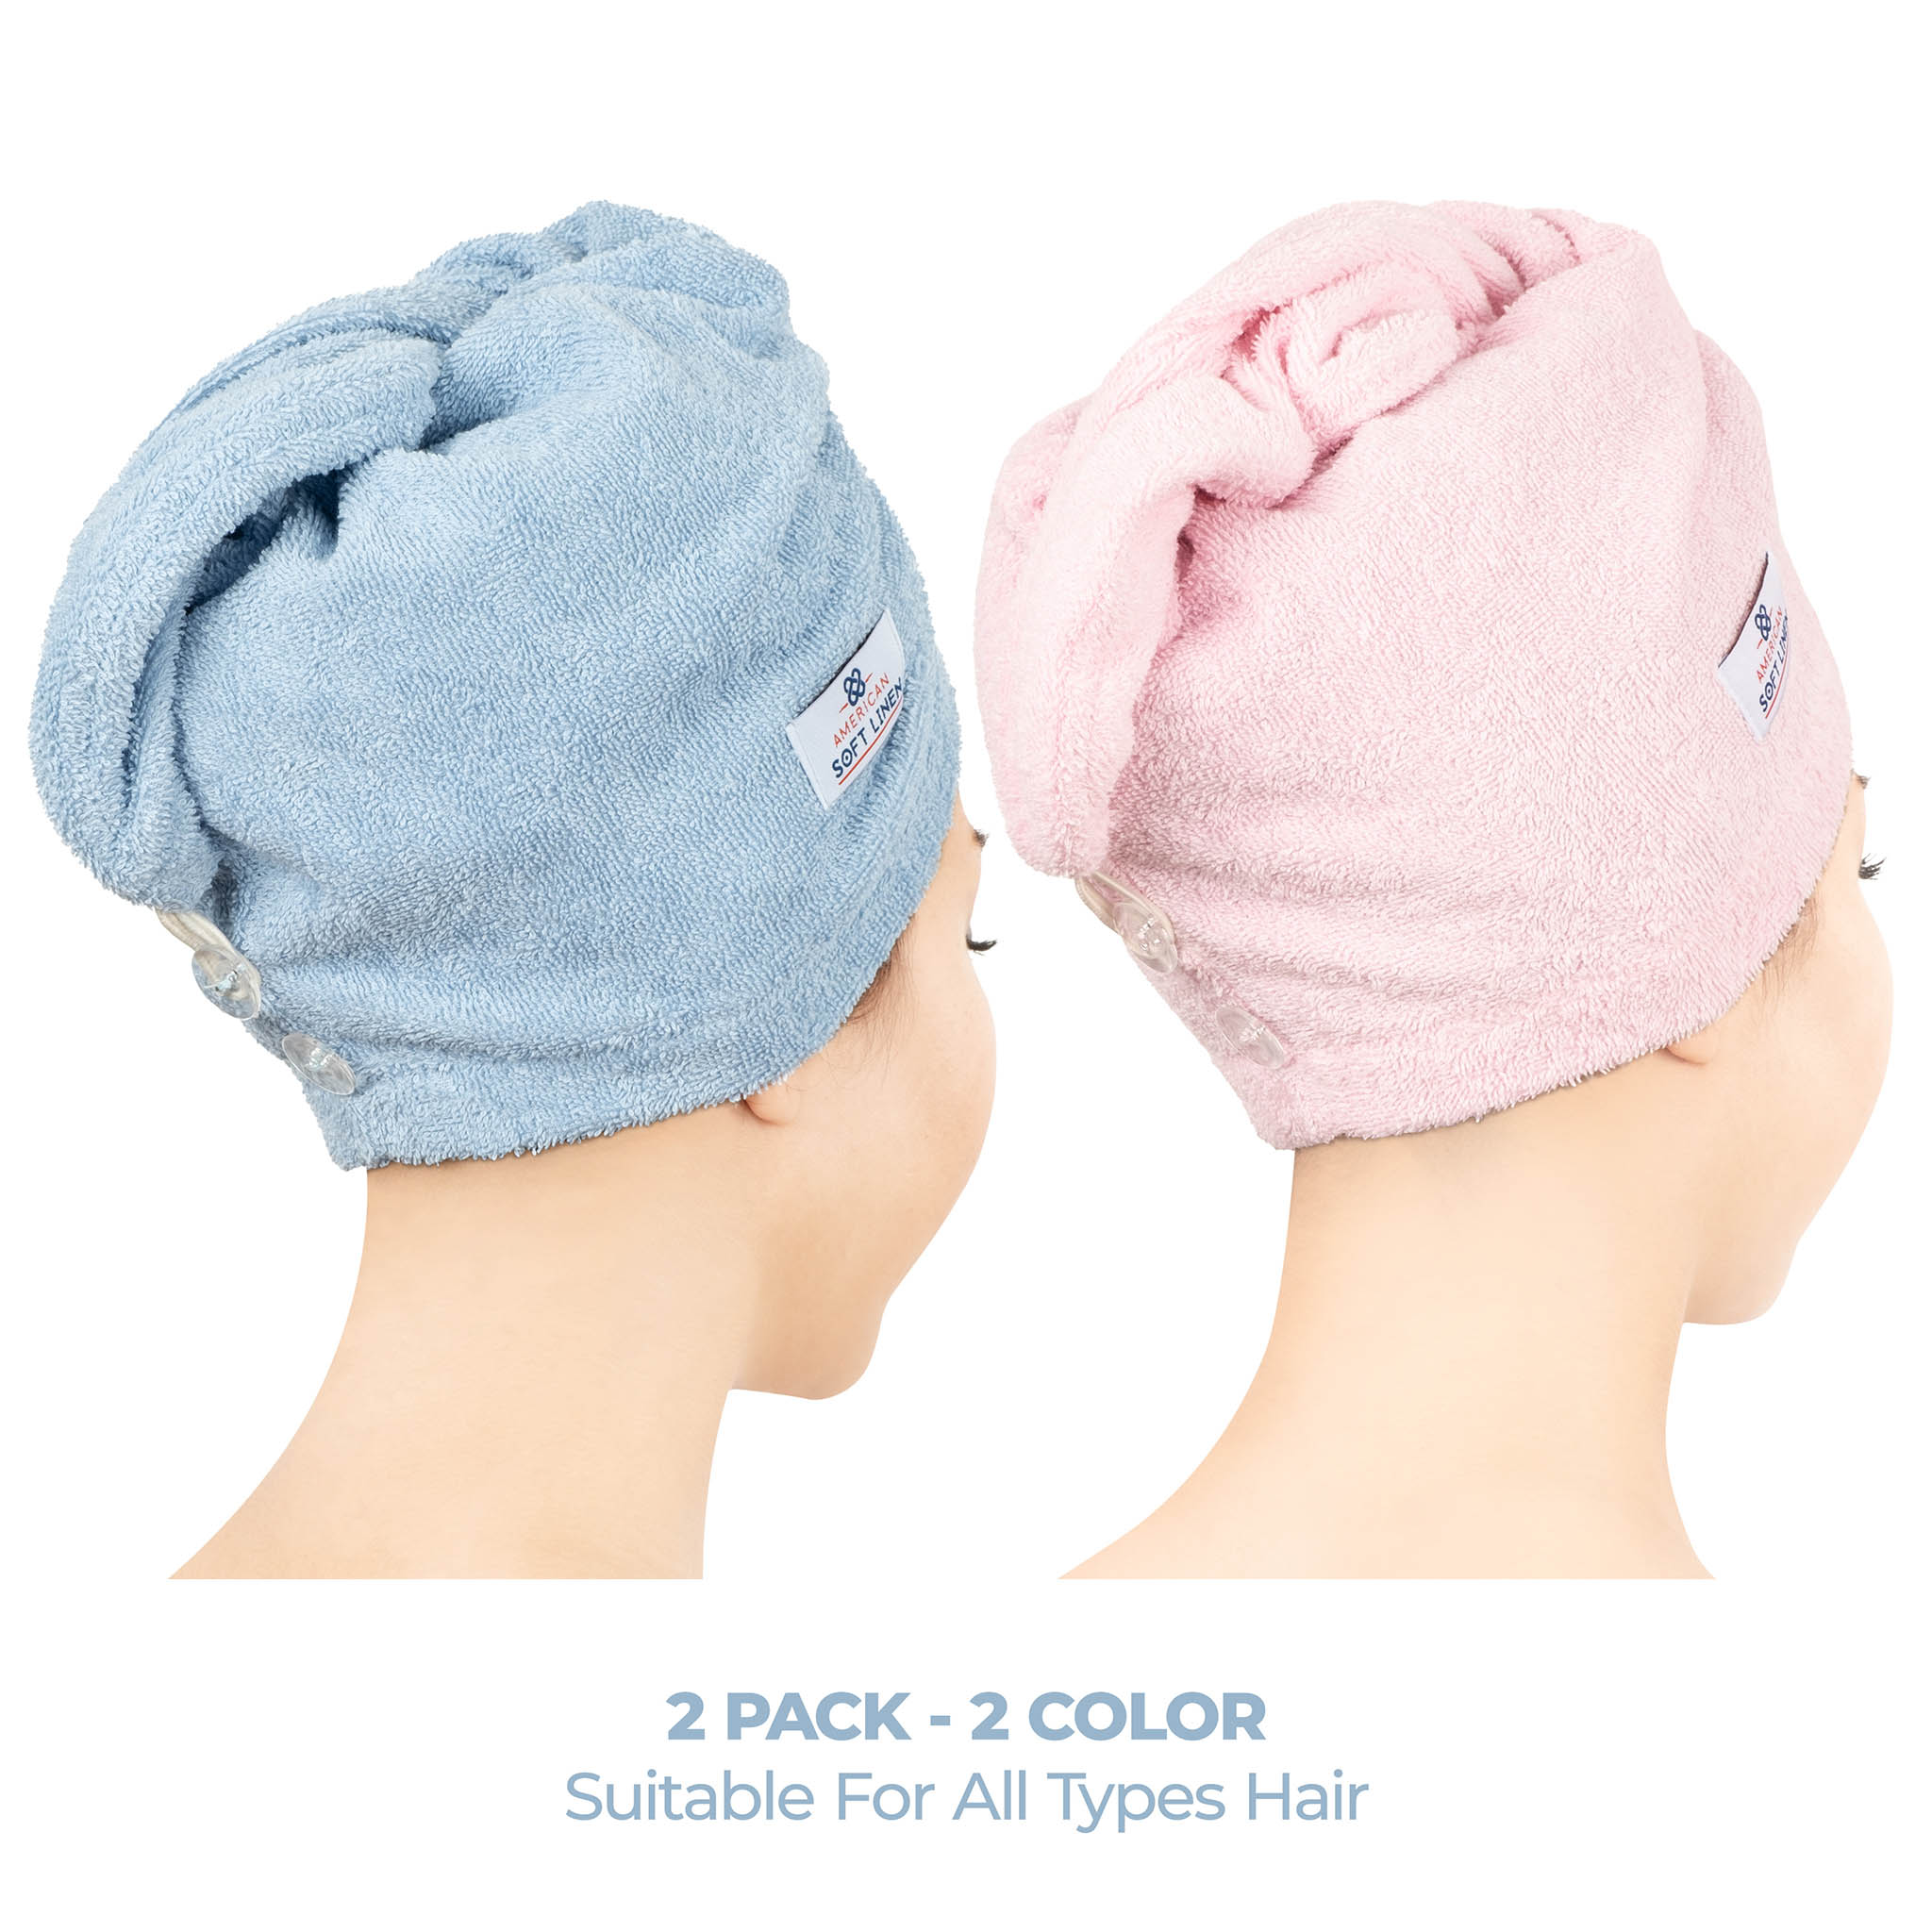 American Soft Linen 100% Cotton Hair Drying Towels for Women Sky Blue-Pink-2